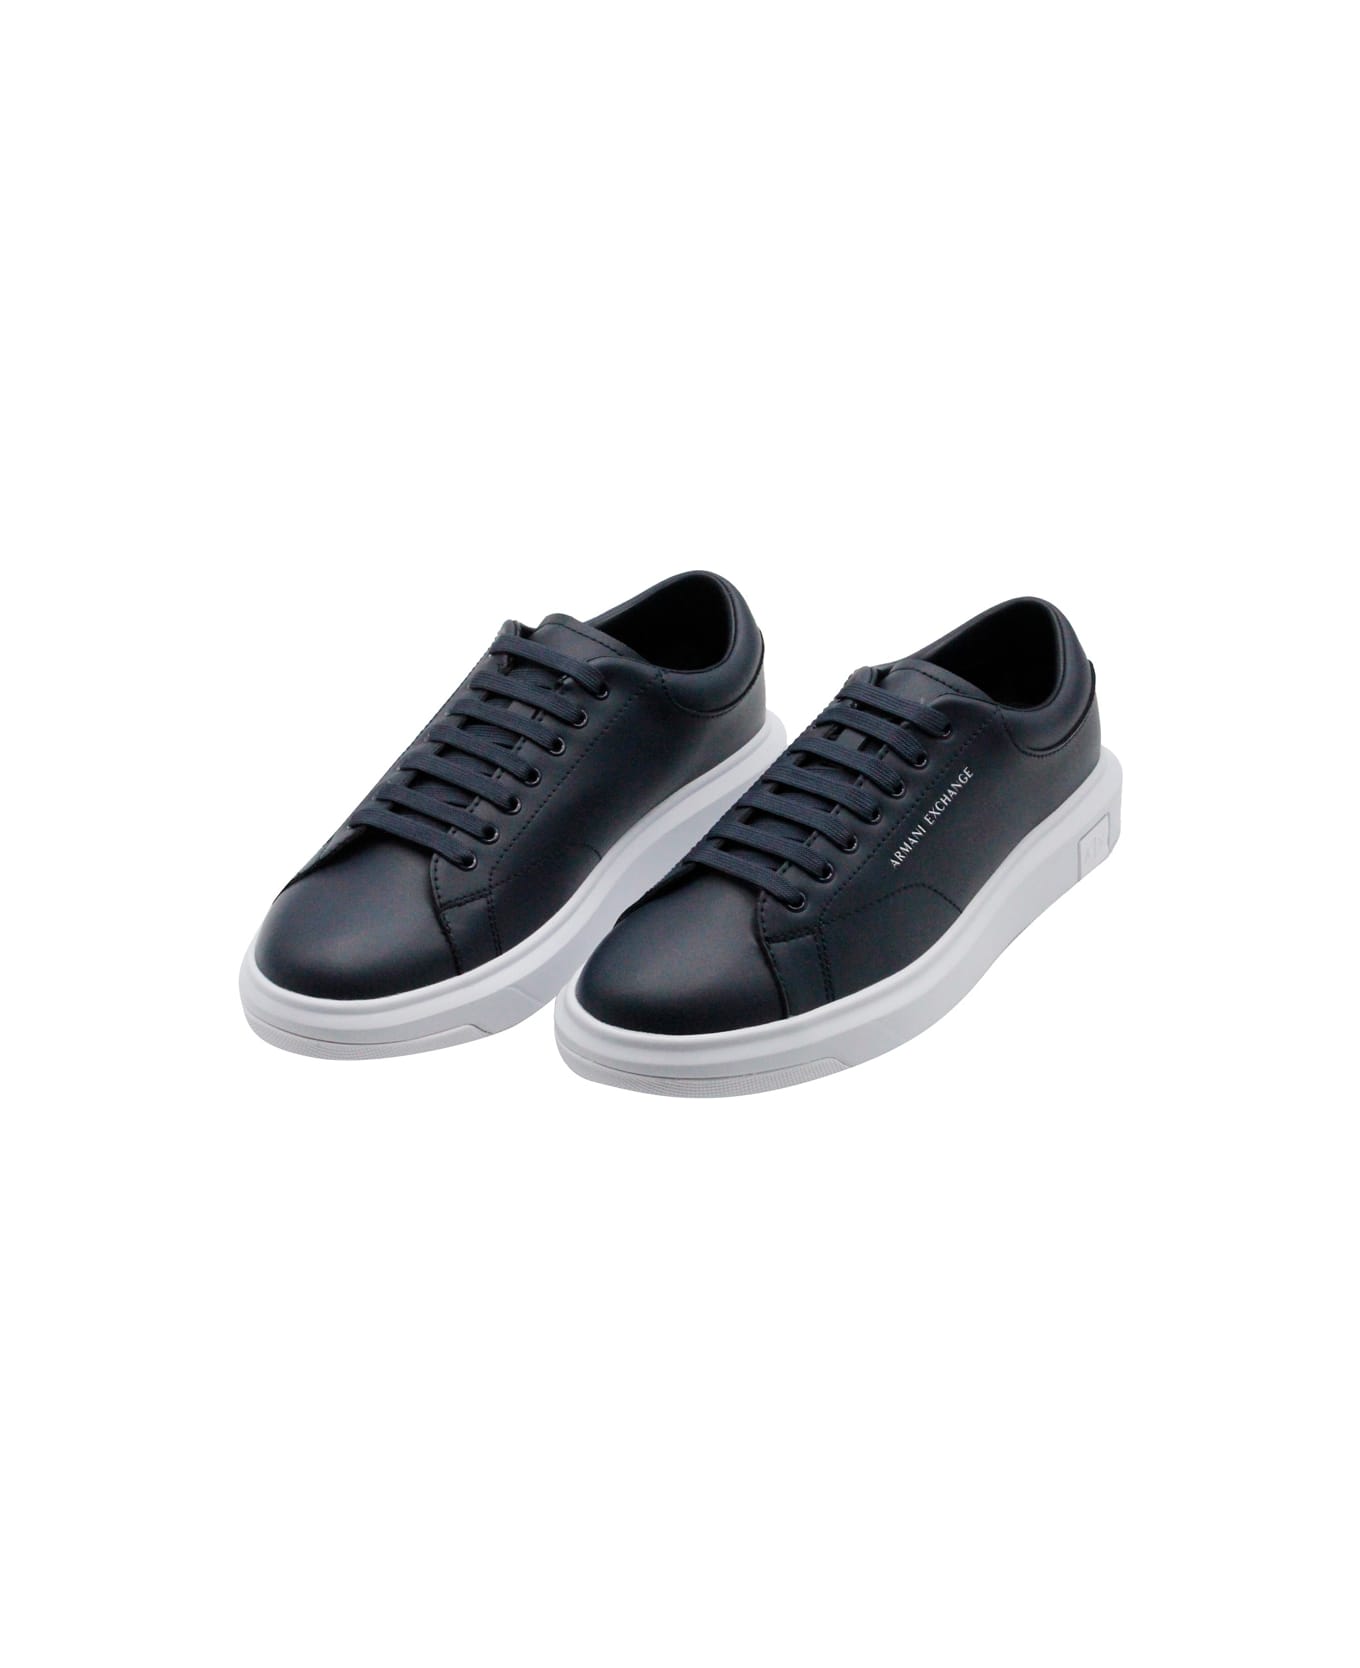 Armani Collezioni Leather Sneakers With Matching Box Sole And Lace Closure. Small Logo On The Tongue And Back - Blu